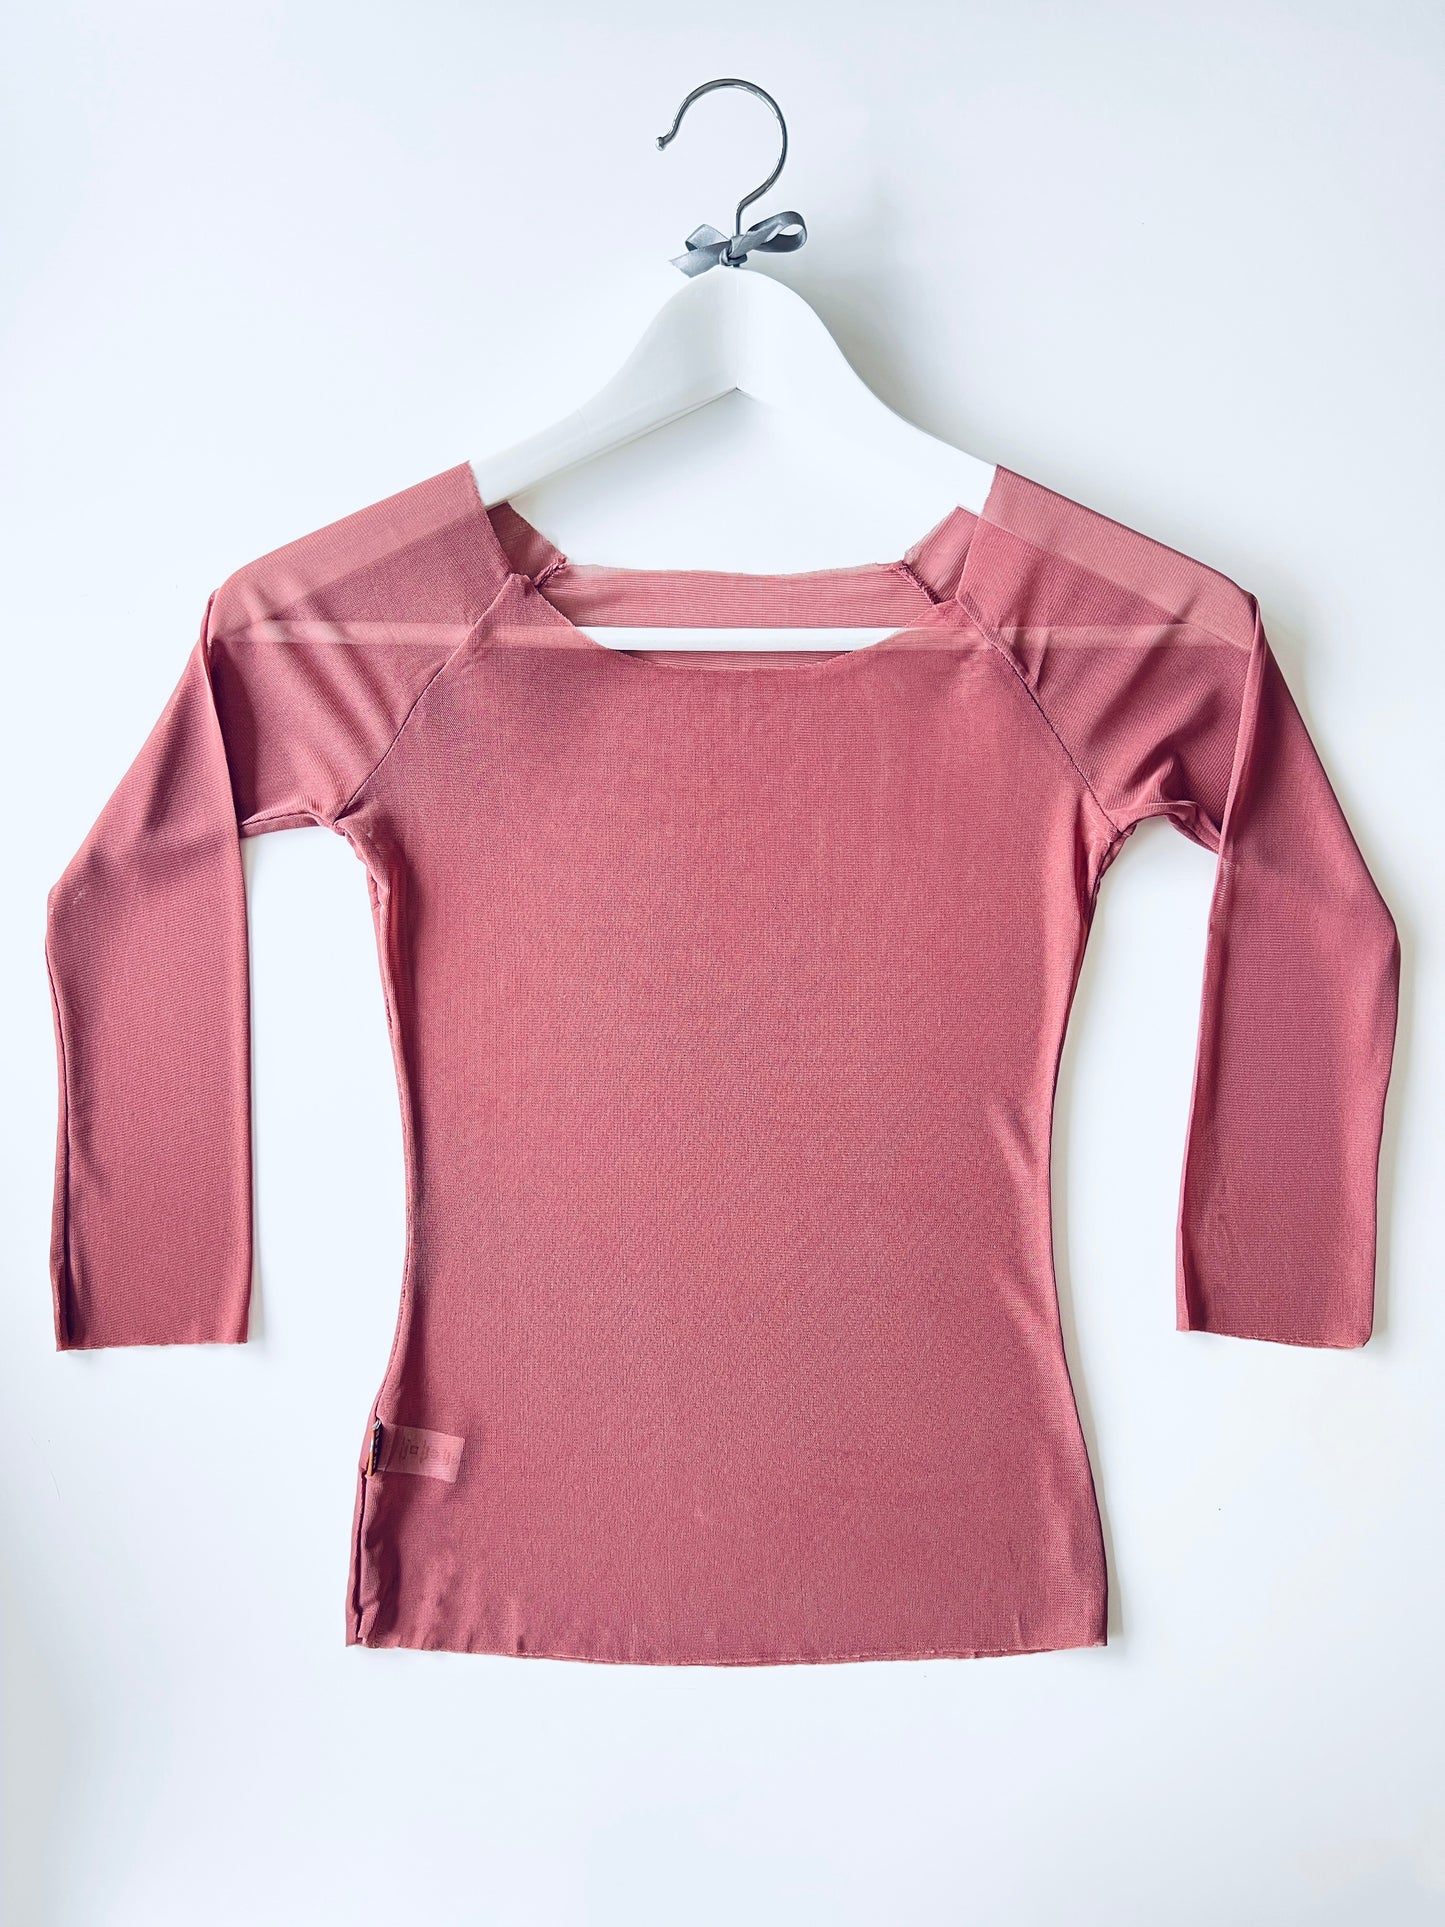  Mesh Top 3/4 Sleeve - Spiced Coral from The Collective Dancewear